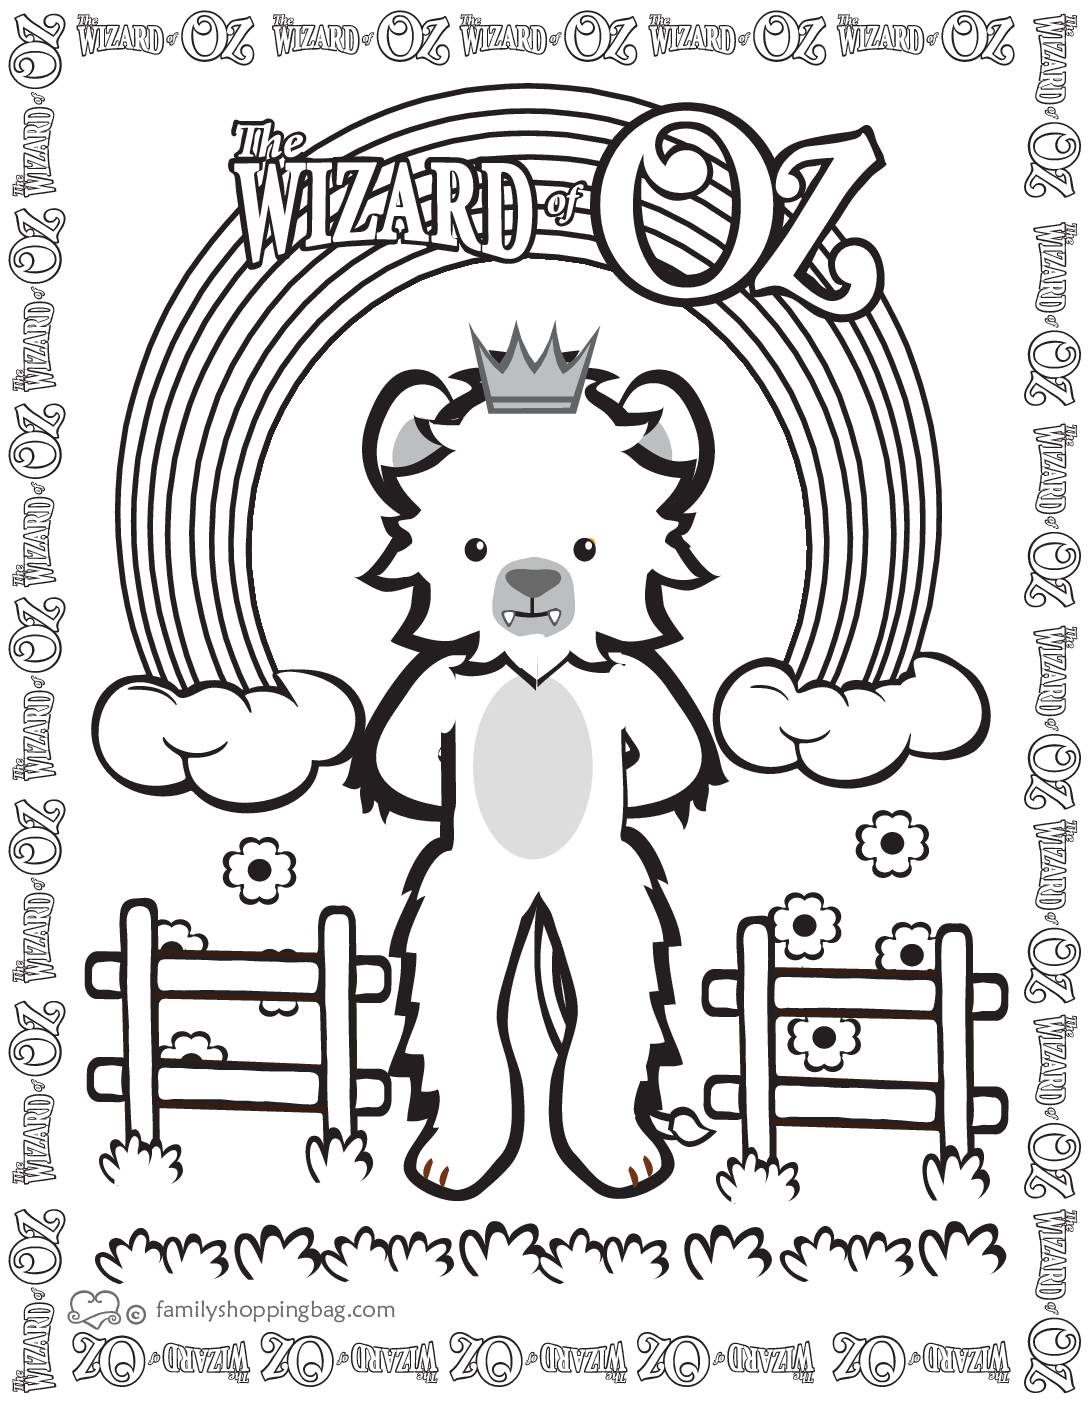 Coloring page wizard of oz